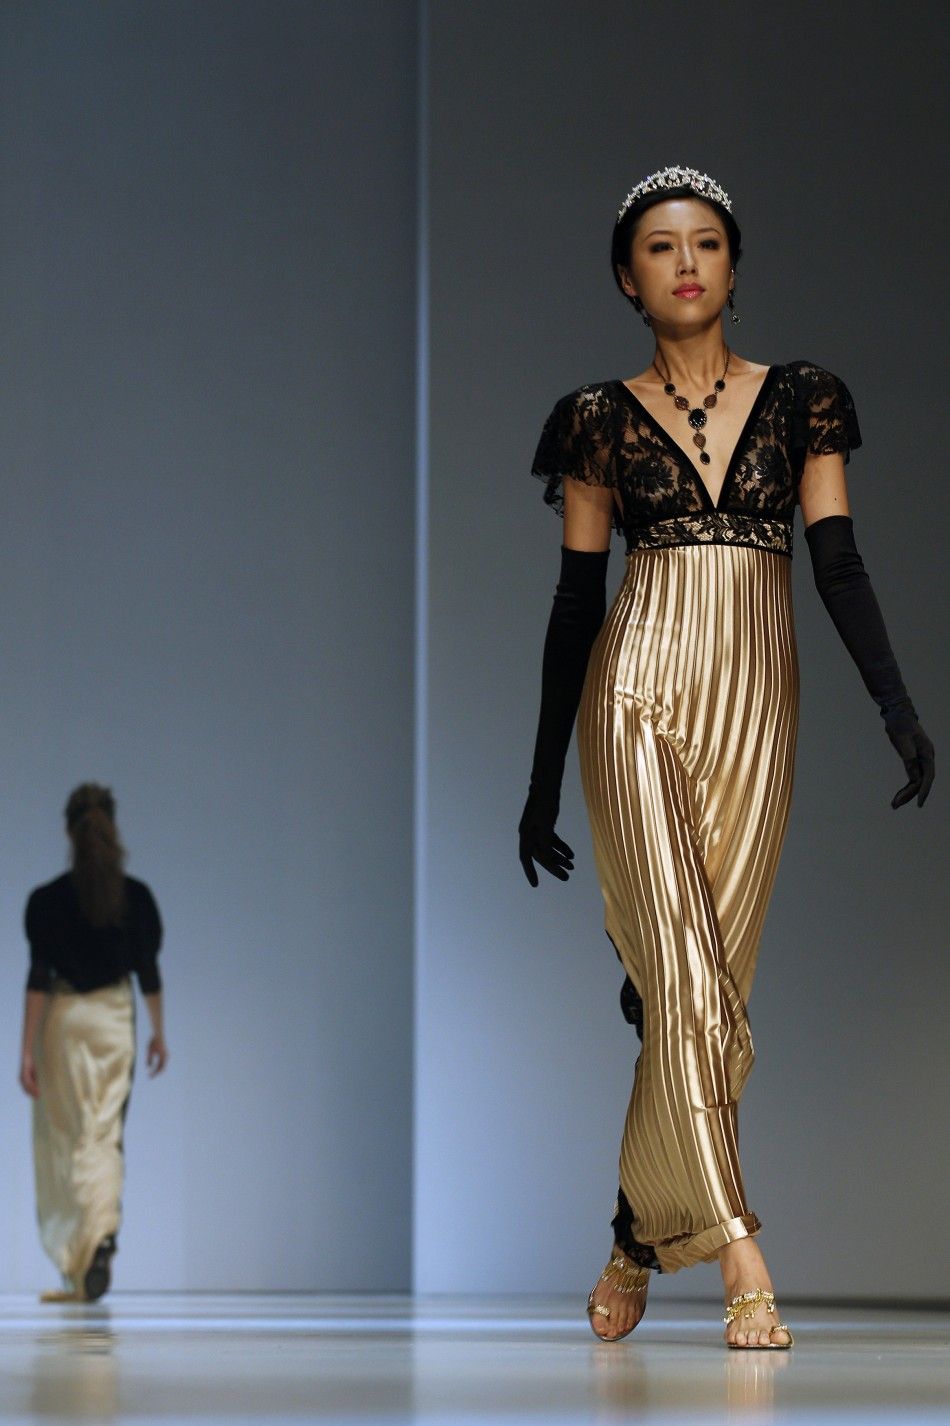 A model presents a creation from the brand Mondovi by designer Do Do Leung of Hong Kong as part of her FallWinter 2012 fashion show during Hong Kong Fashion Week January 16, 2012. Hong Kong Fashion Week, which lasts till January 19, features about 1,900 